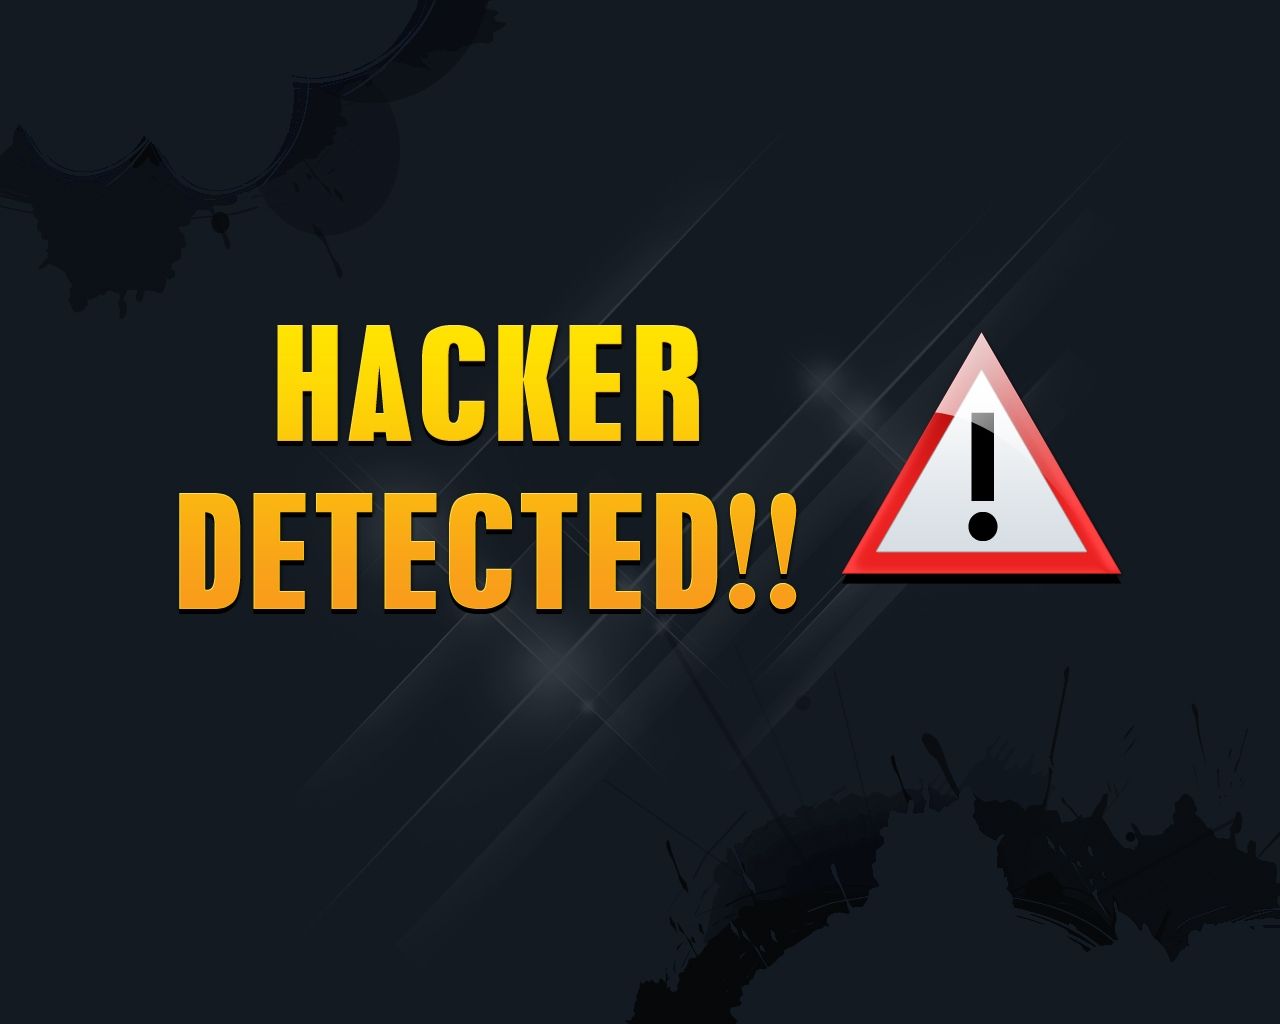 Time to complain about hackers